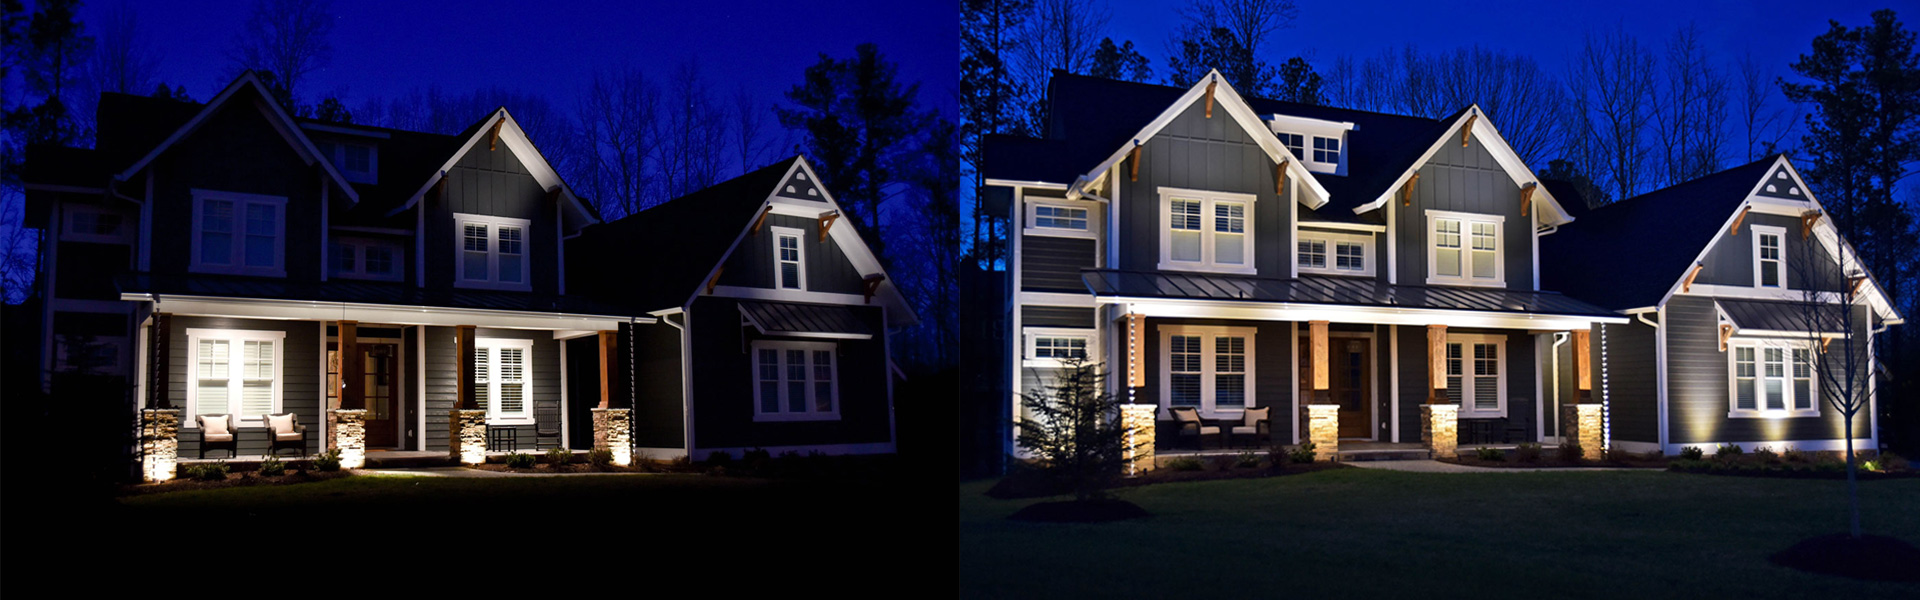 LED_lighting_service_before_after